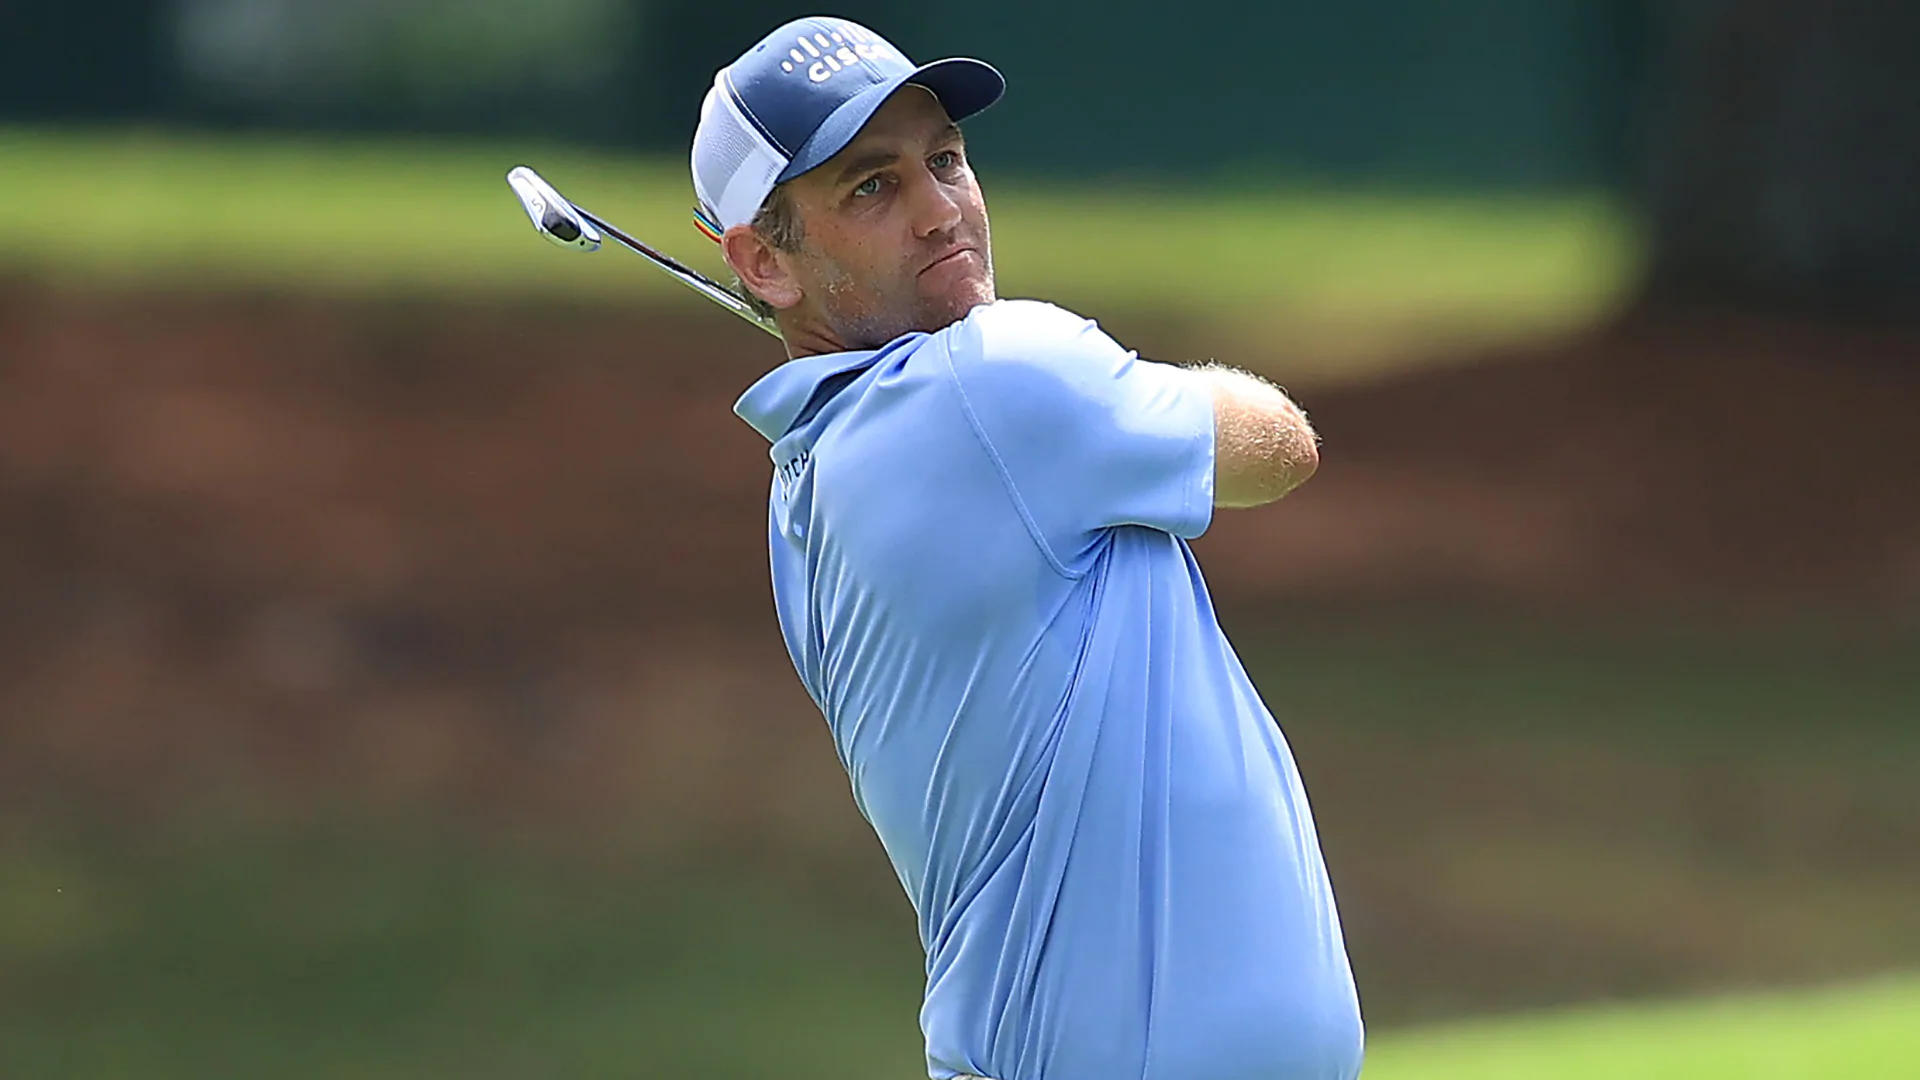 Brendon Todd vaults into lead on Day 2 in Memphis while Brooks Koepka falls back